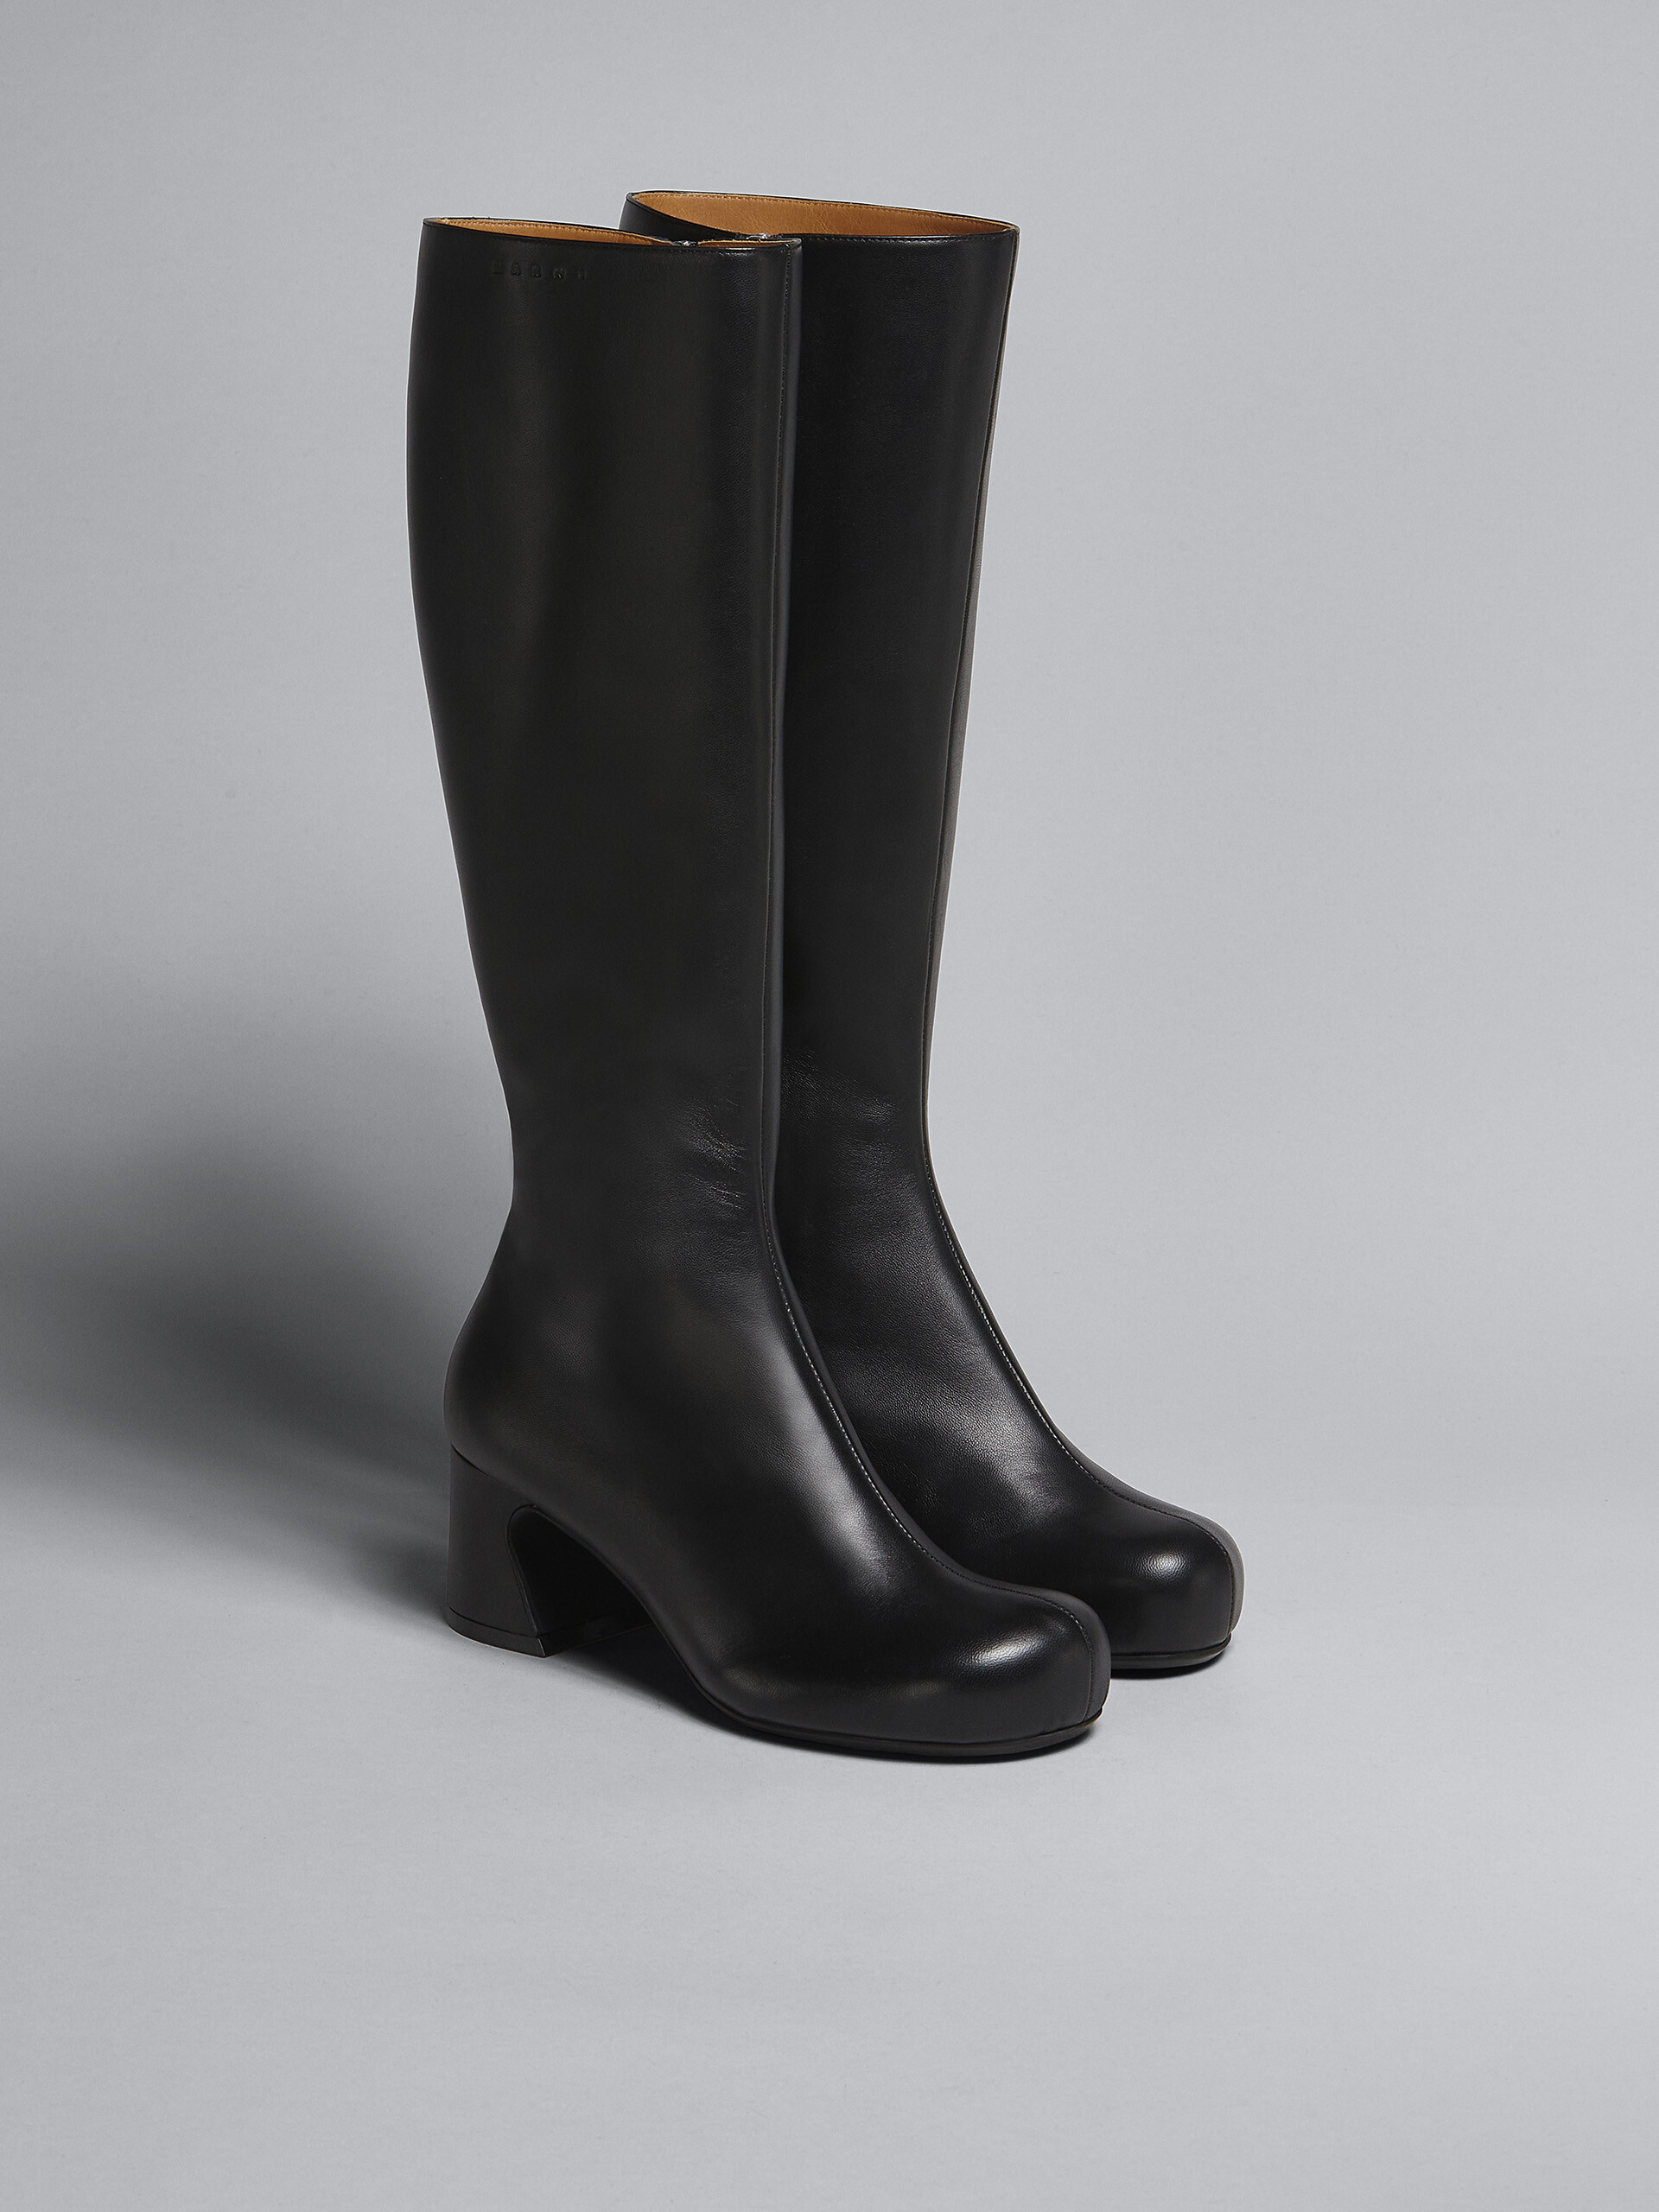 Black leather boot - Boots - Image 2